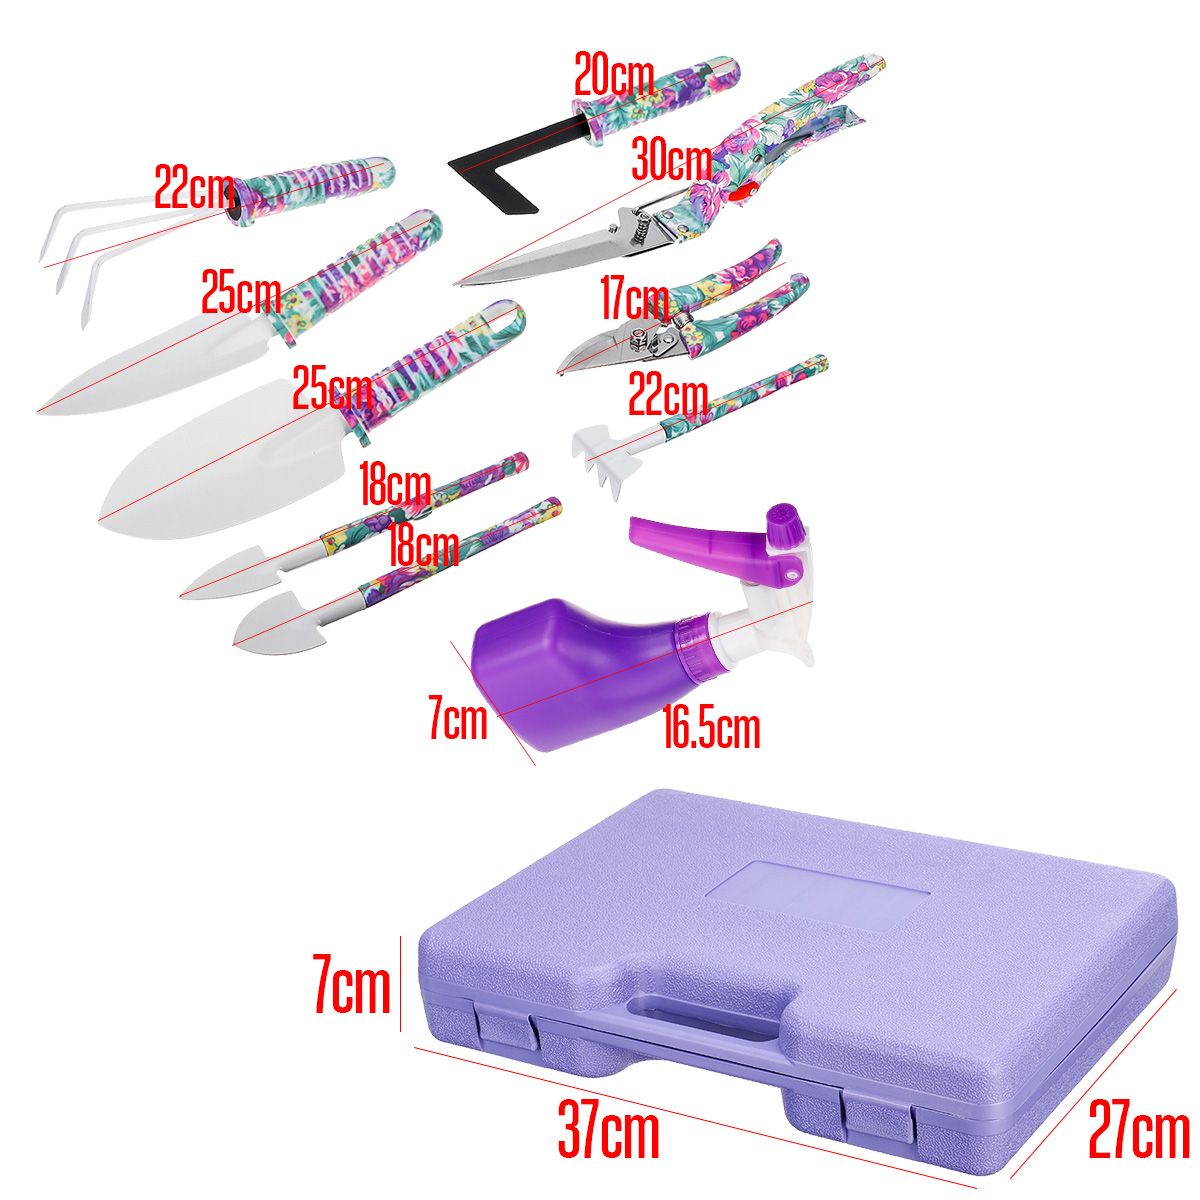 510Pcs-Gardening-Plant-Tool-Set-Garden-Yard-Plant-Flower-Care-Hand-Tools-with-Case-1719696